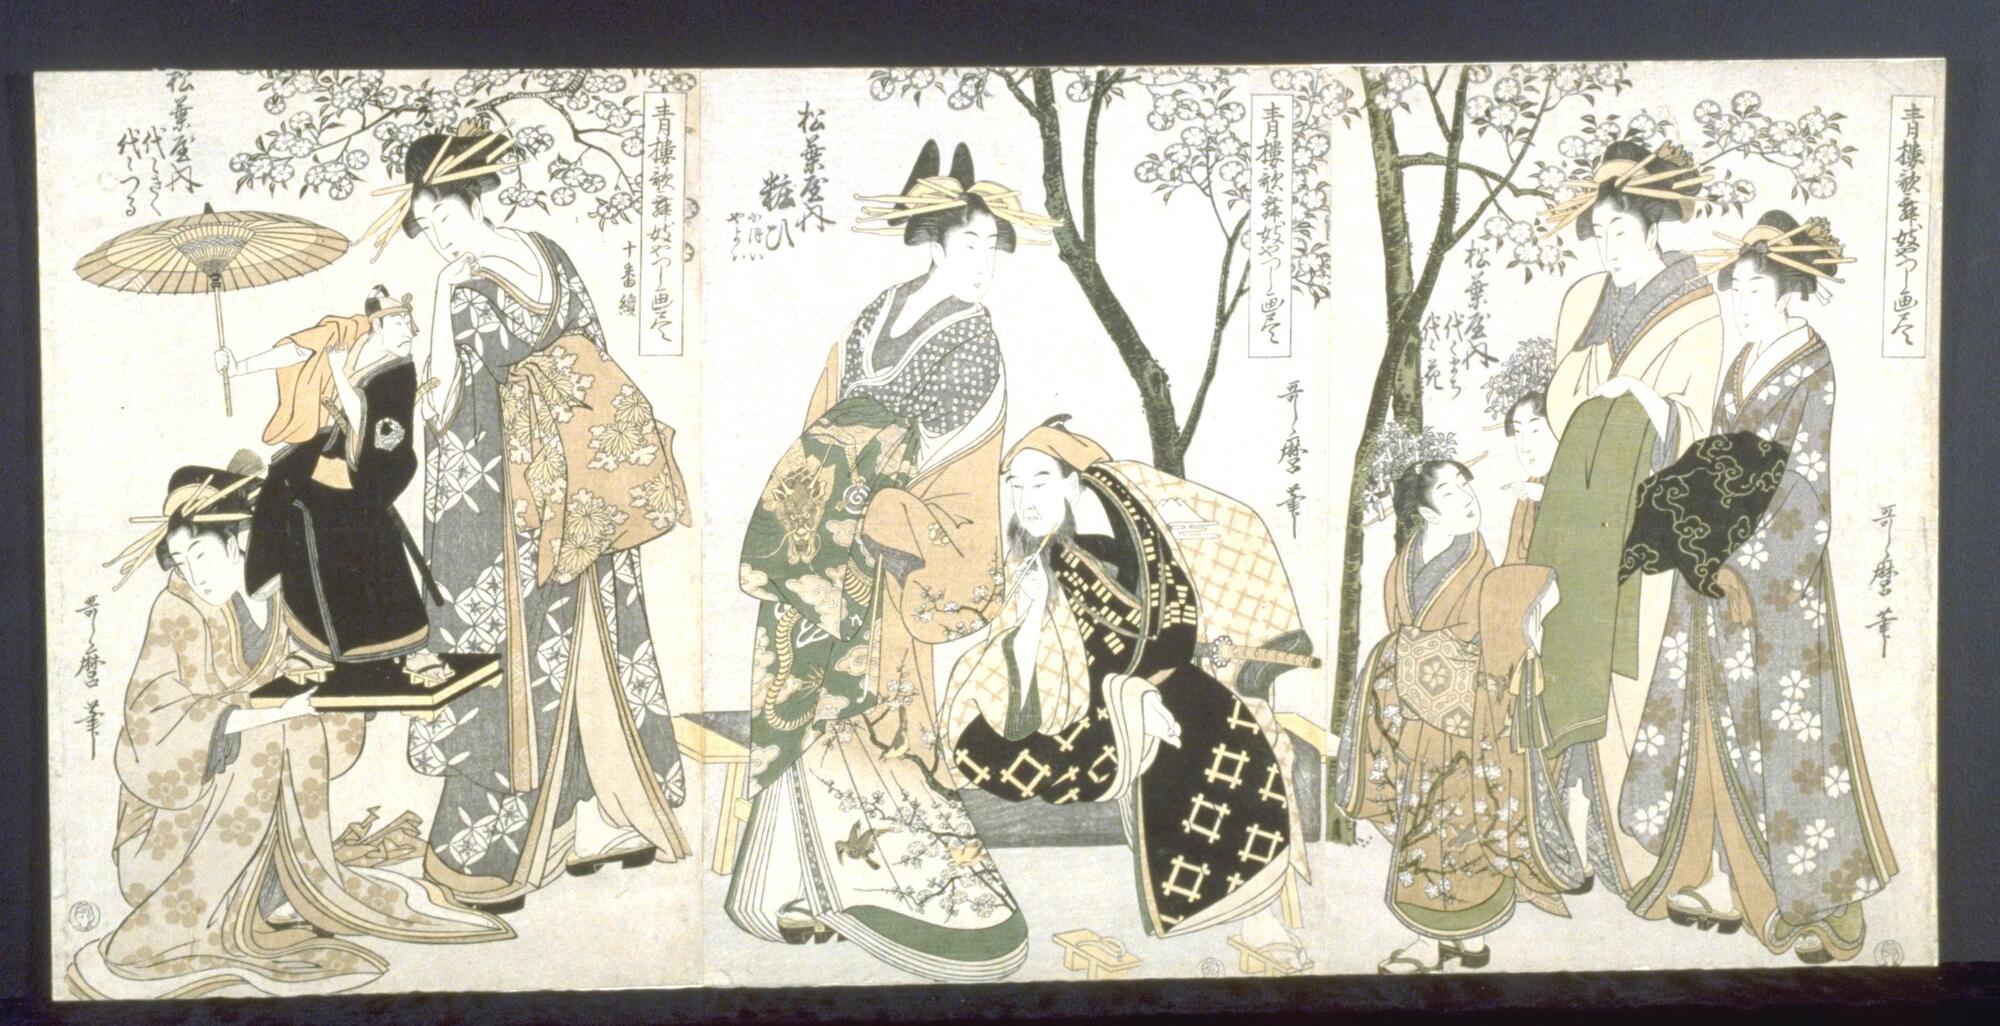 This is a triptych, displaying all three panels at once. In the left panel, a woman squats, holding a book, on which stands a man holding an umbrella. Another standing woman looks over her shoulder at it. In the center panel, an older man is seated on a bench with a brush or pipe in his hand. A woman looks at him over her shoulder. In the right panel, two woman stand with two girls. One of the girls is half hidden behind the woman on the left and gesturing forward.  The other girl looks up at the two woman. In the background are white flowering trees as well as some calligraphy.<br /><br />
This is a set with 1948/1.185 and 1948/1.187.<br /><br />
 